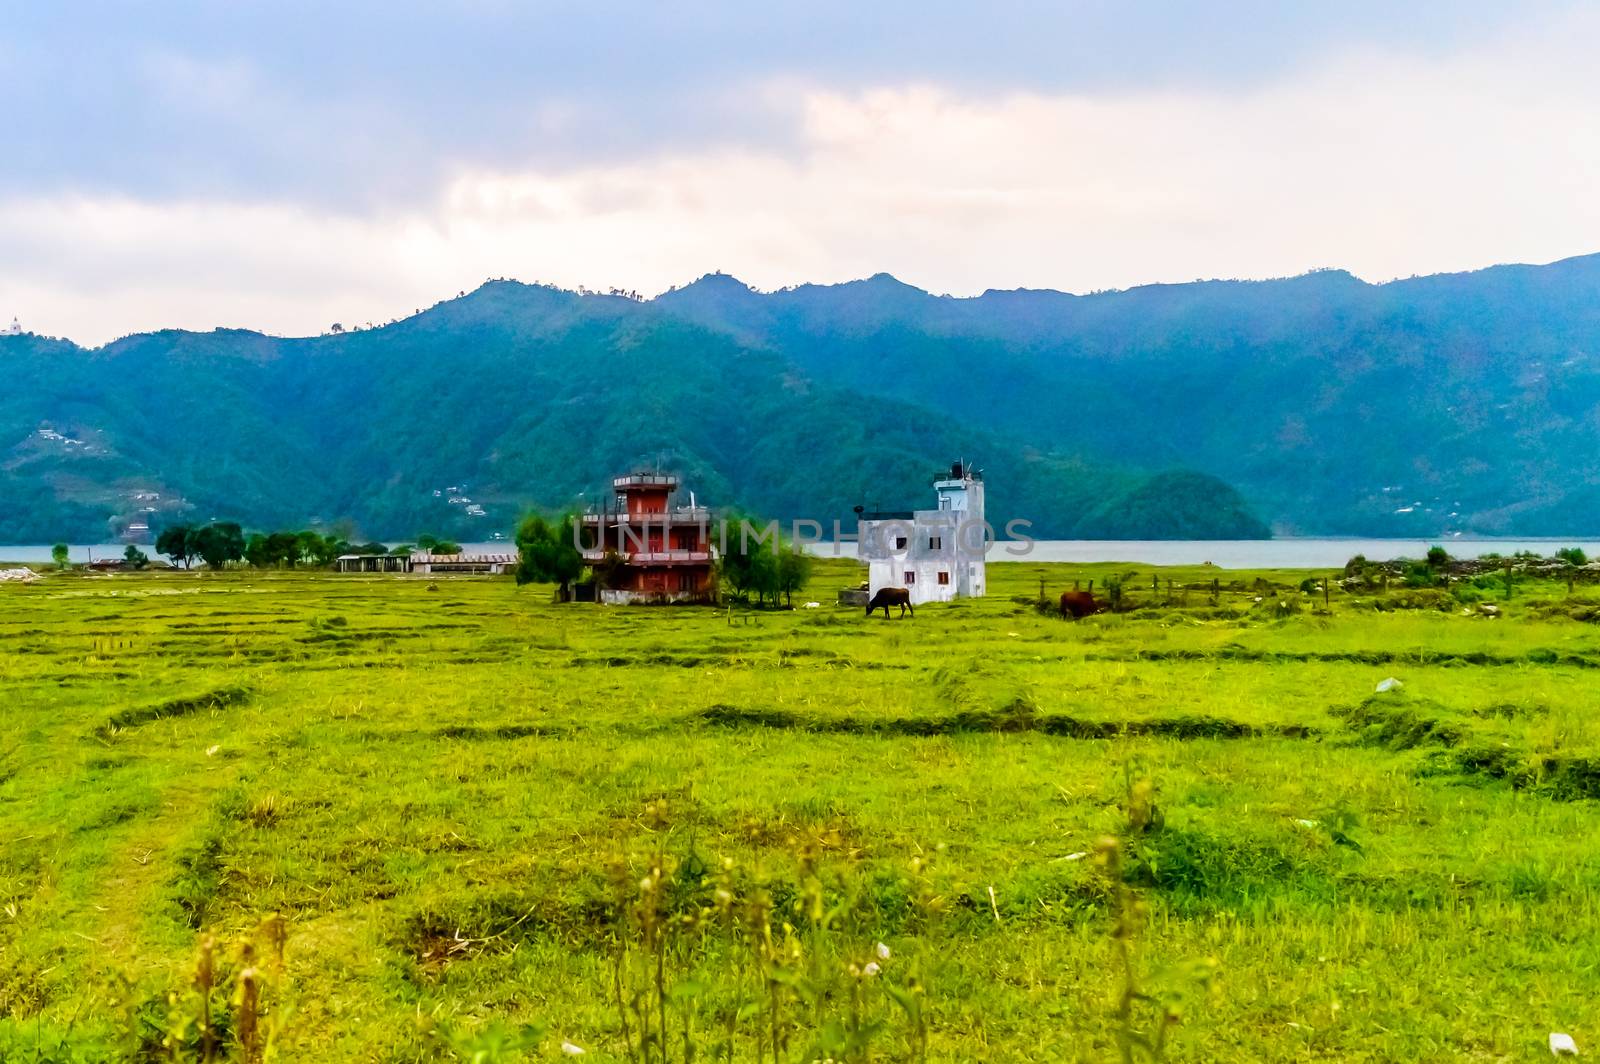 Photograph of winter season: A farm house, lake, mountain, clear sky and farm land. Wide angle landscape of Pokhara Lake at Kathmandu Nepal. Vintage film look. Vacation Freedom, Simplicity Concept. by sudiptabhowmick